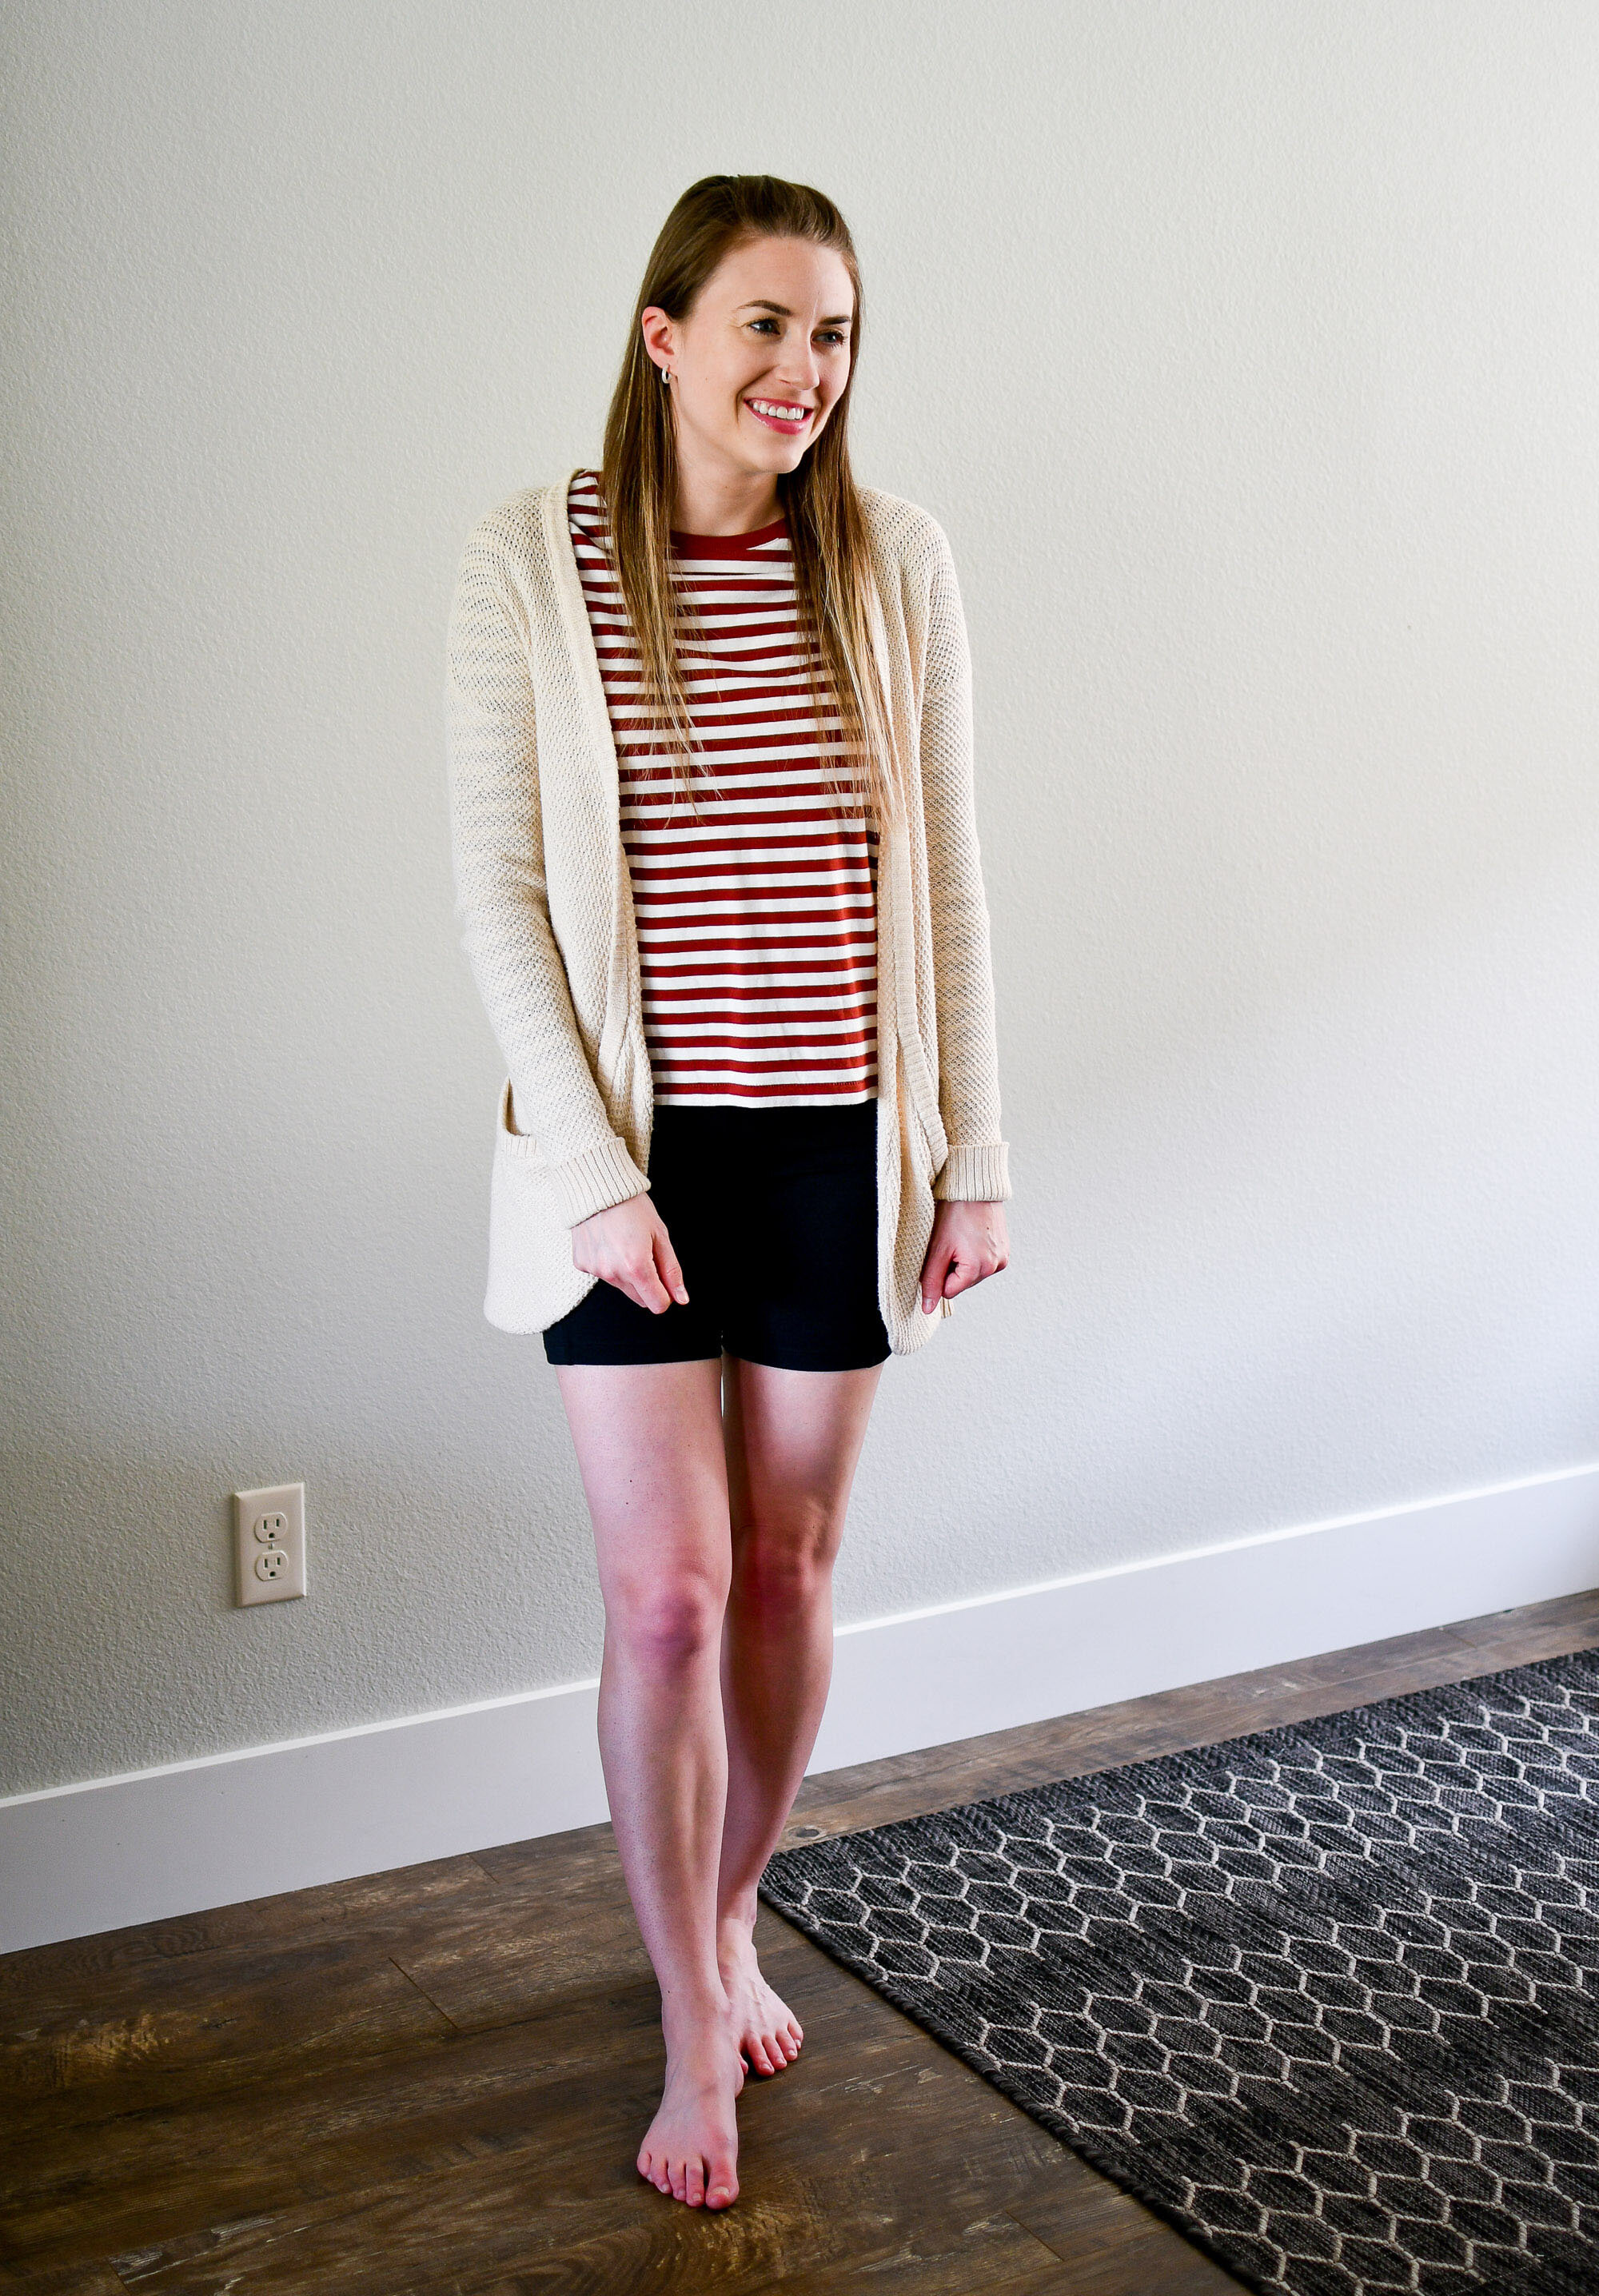 Cream cardigan, dark red striped tee, black bike shorts casual spring outfit — Cotton Cashmere Cat Hair